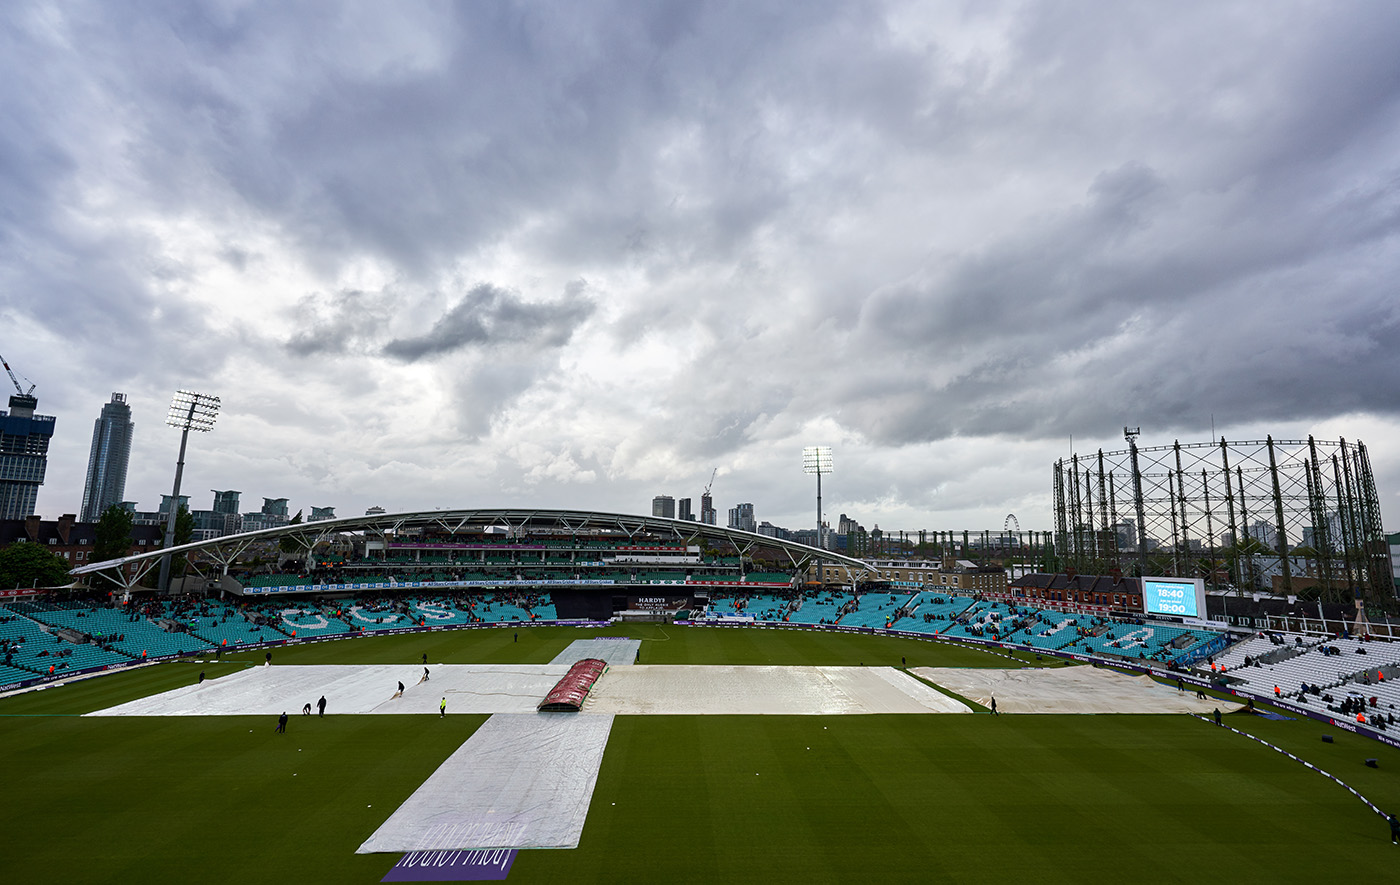 Pakistan’s First ODI Against England Gets Washed Out